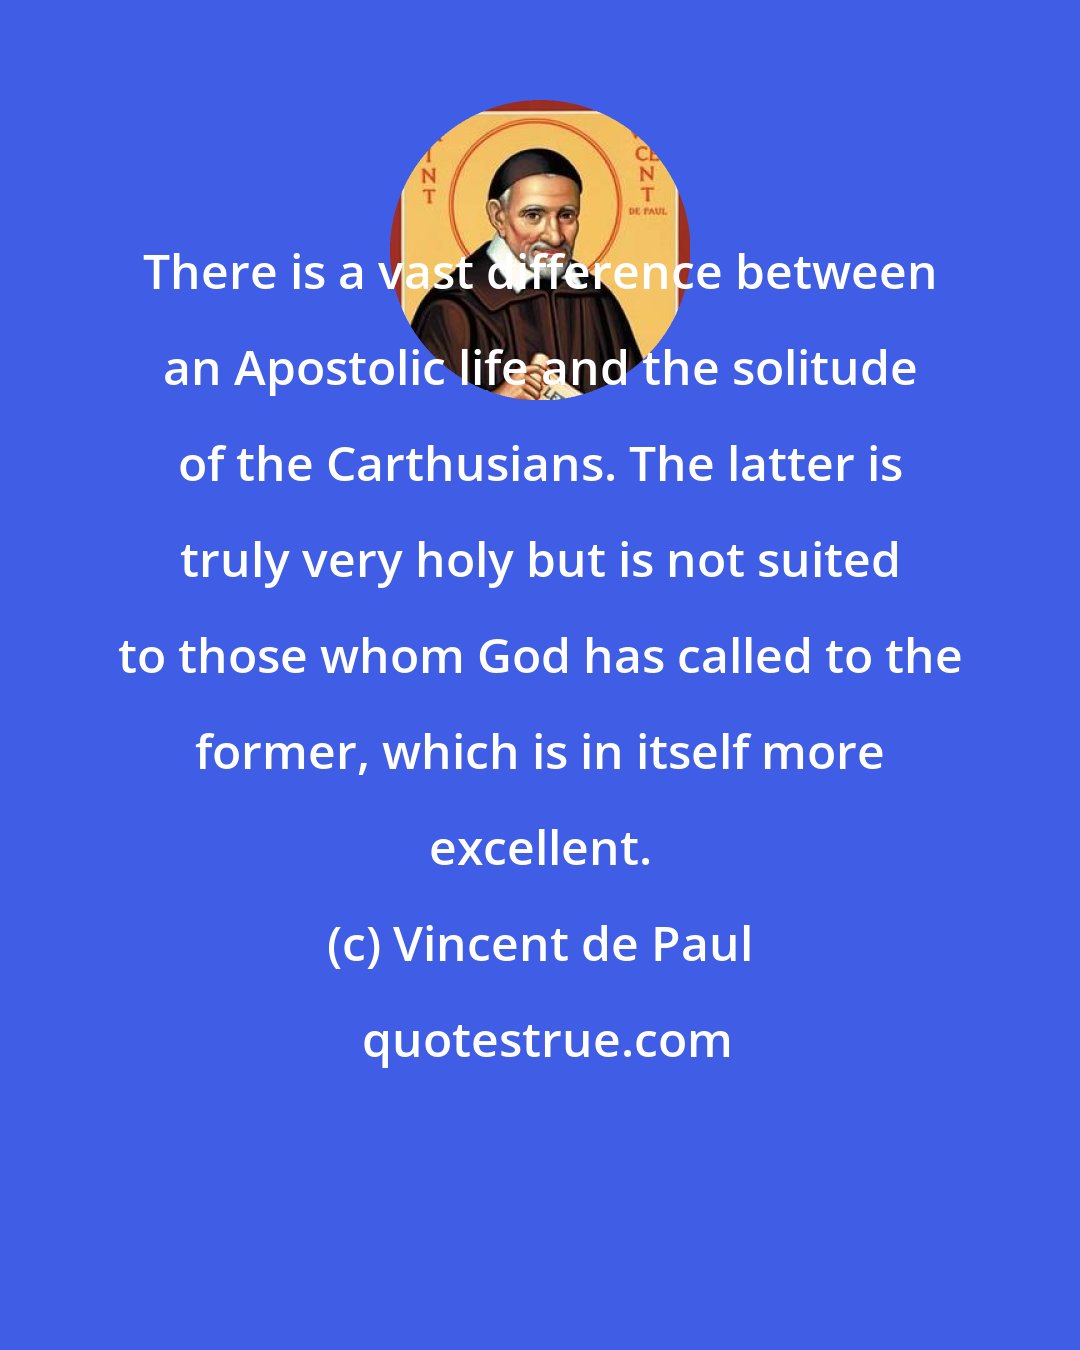 Vincent de Paul: There is a vast difference between an Apostolic life and the solitude of the Carthusians. The latter is truly very holy but is not suited to those whom God has called to the former, which is in itself more excellent.